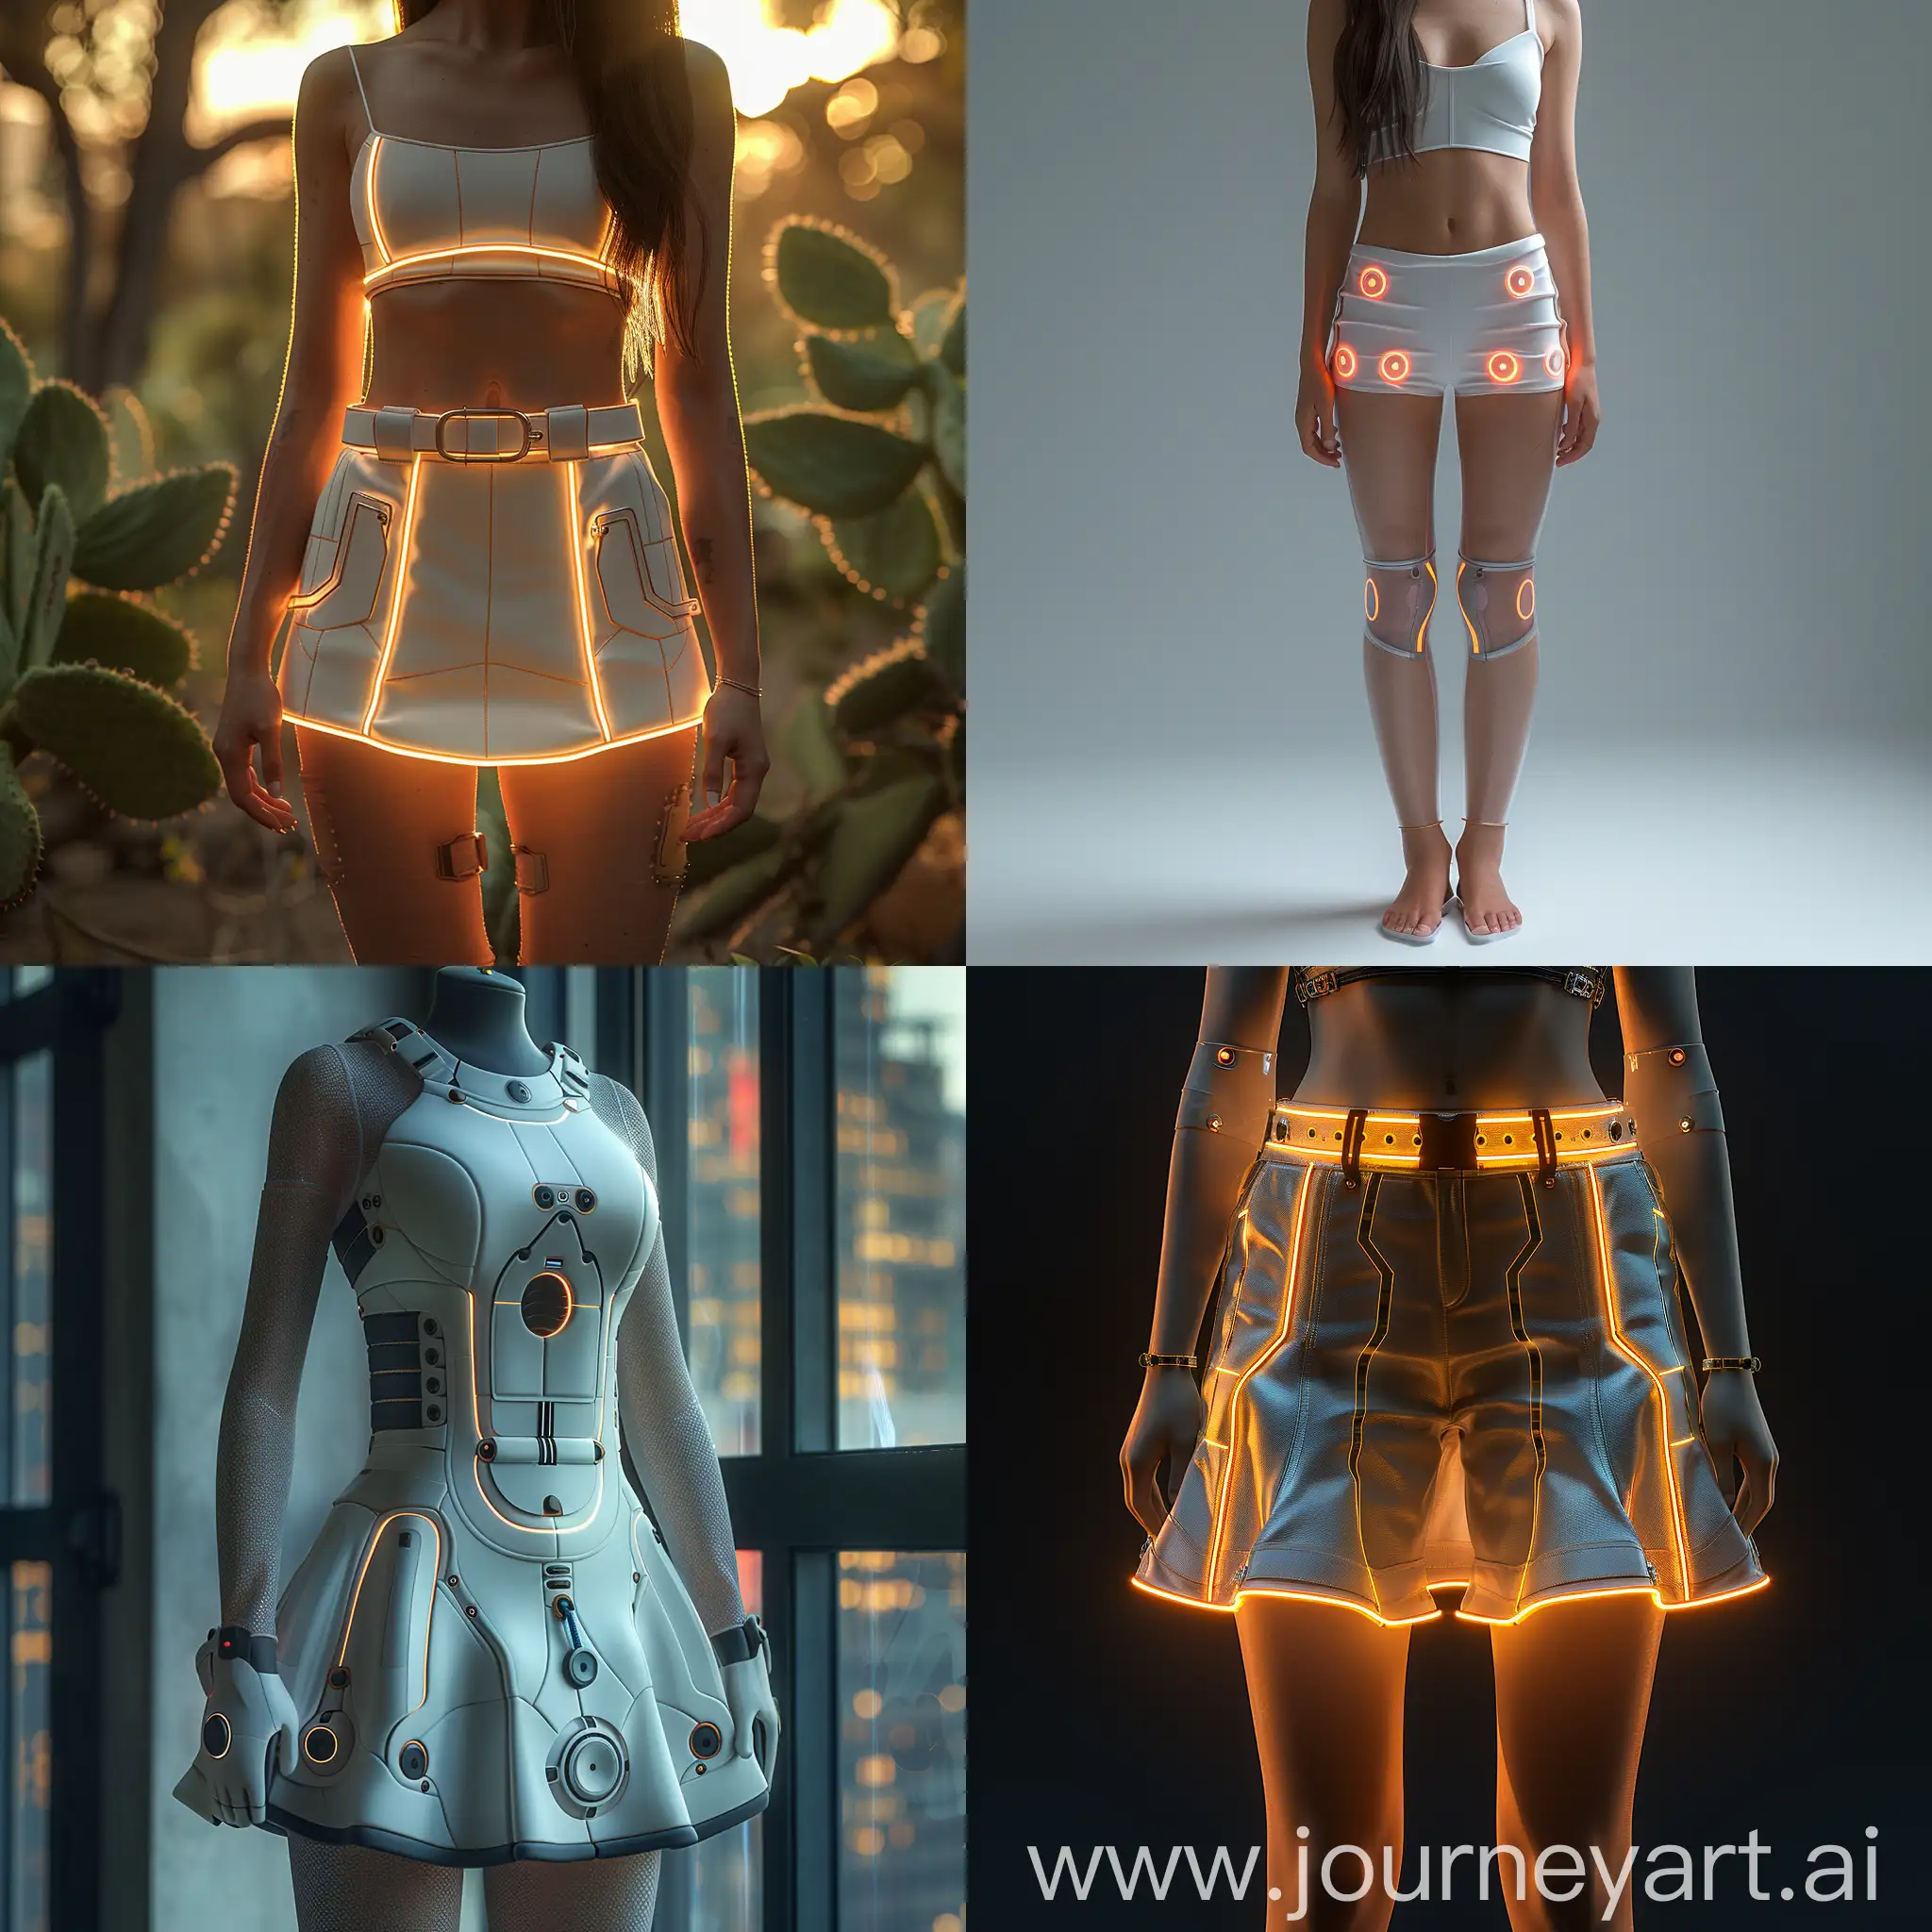 Futuristic-Mini-Skirt-with-Sustainable-Materials-and-Smart-Technology